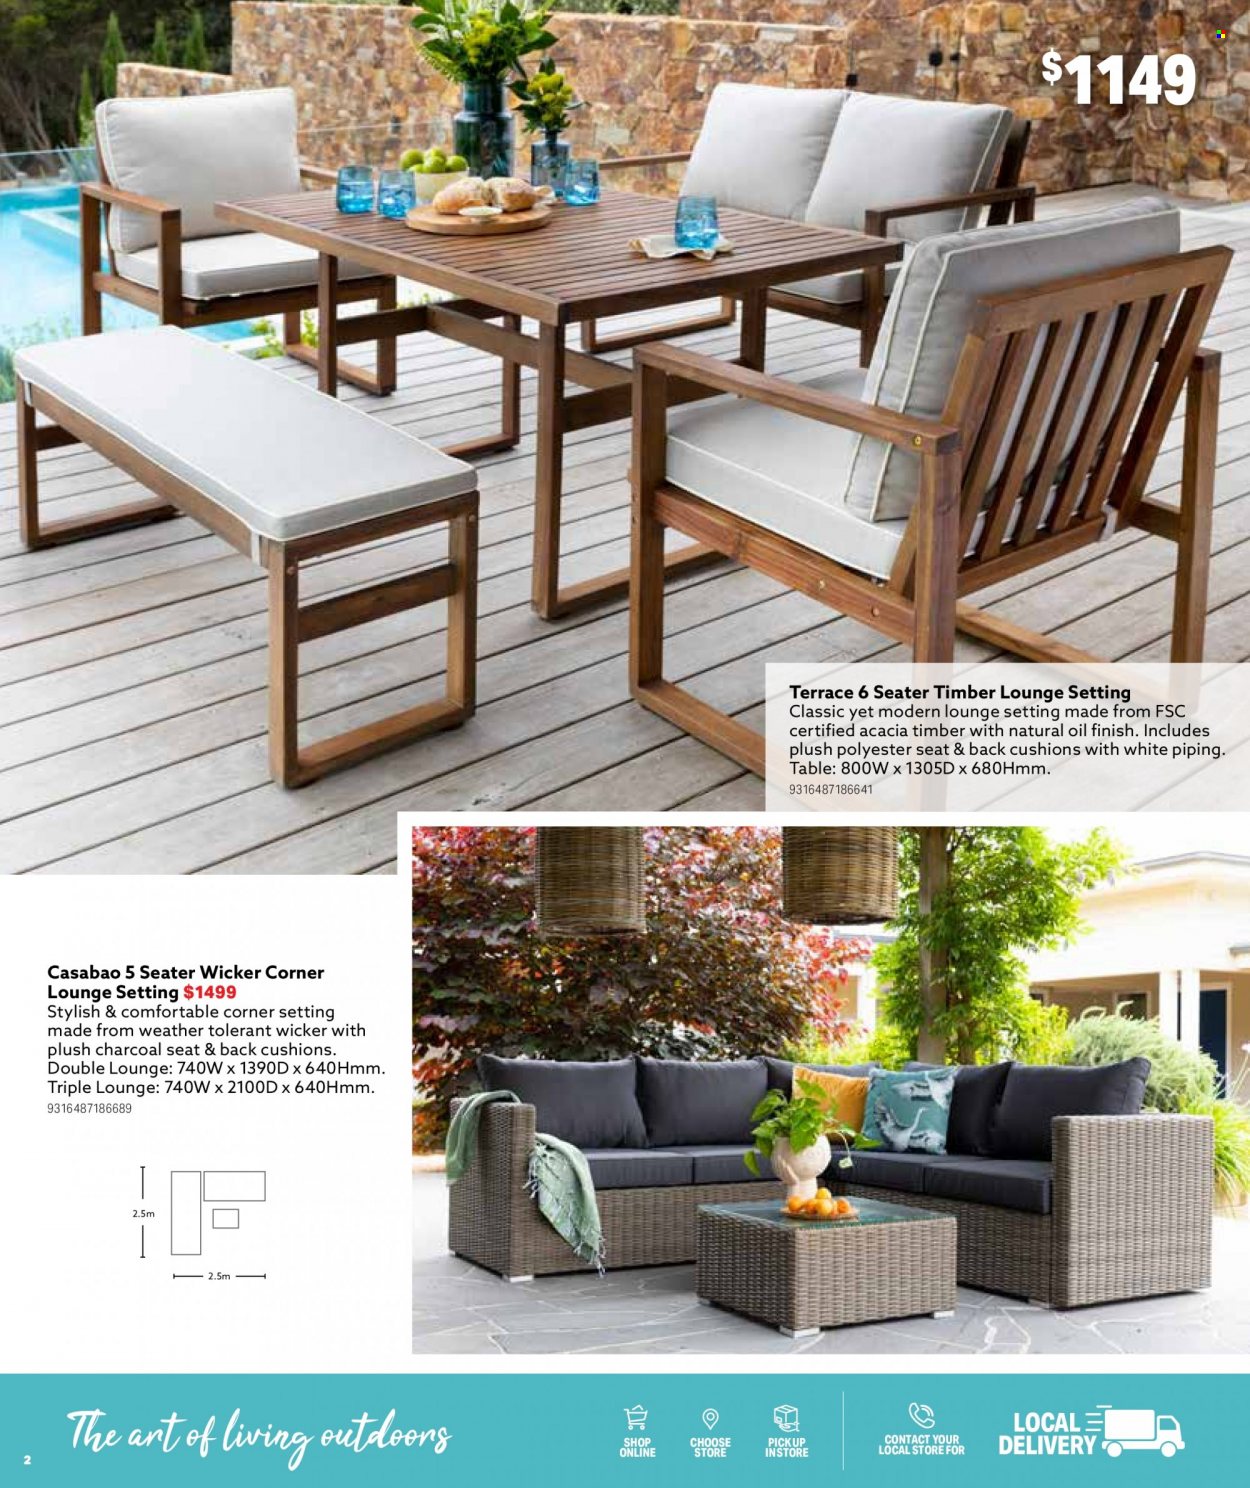 thumbnail - Mitre 10 Catalogue - 14 Sep 2022 - 31 Dec 2022 - Sales products - cushion, table, lounge, charcoal. Page 2.